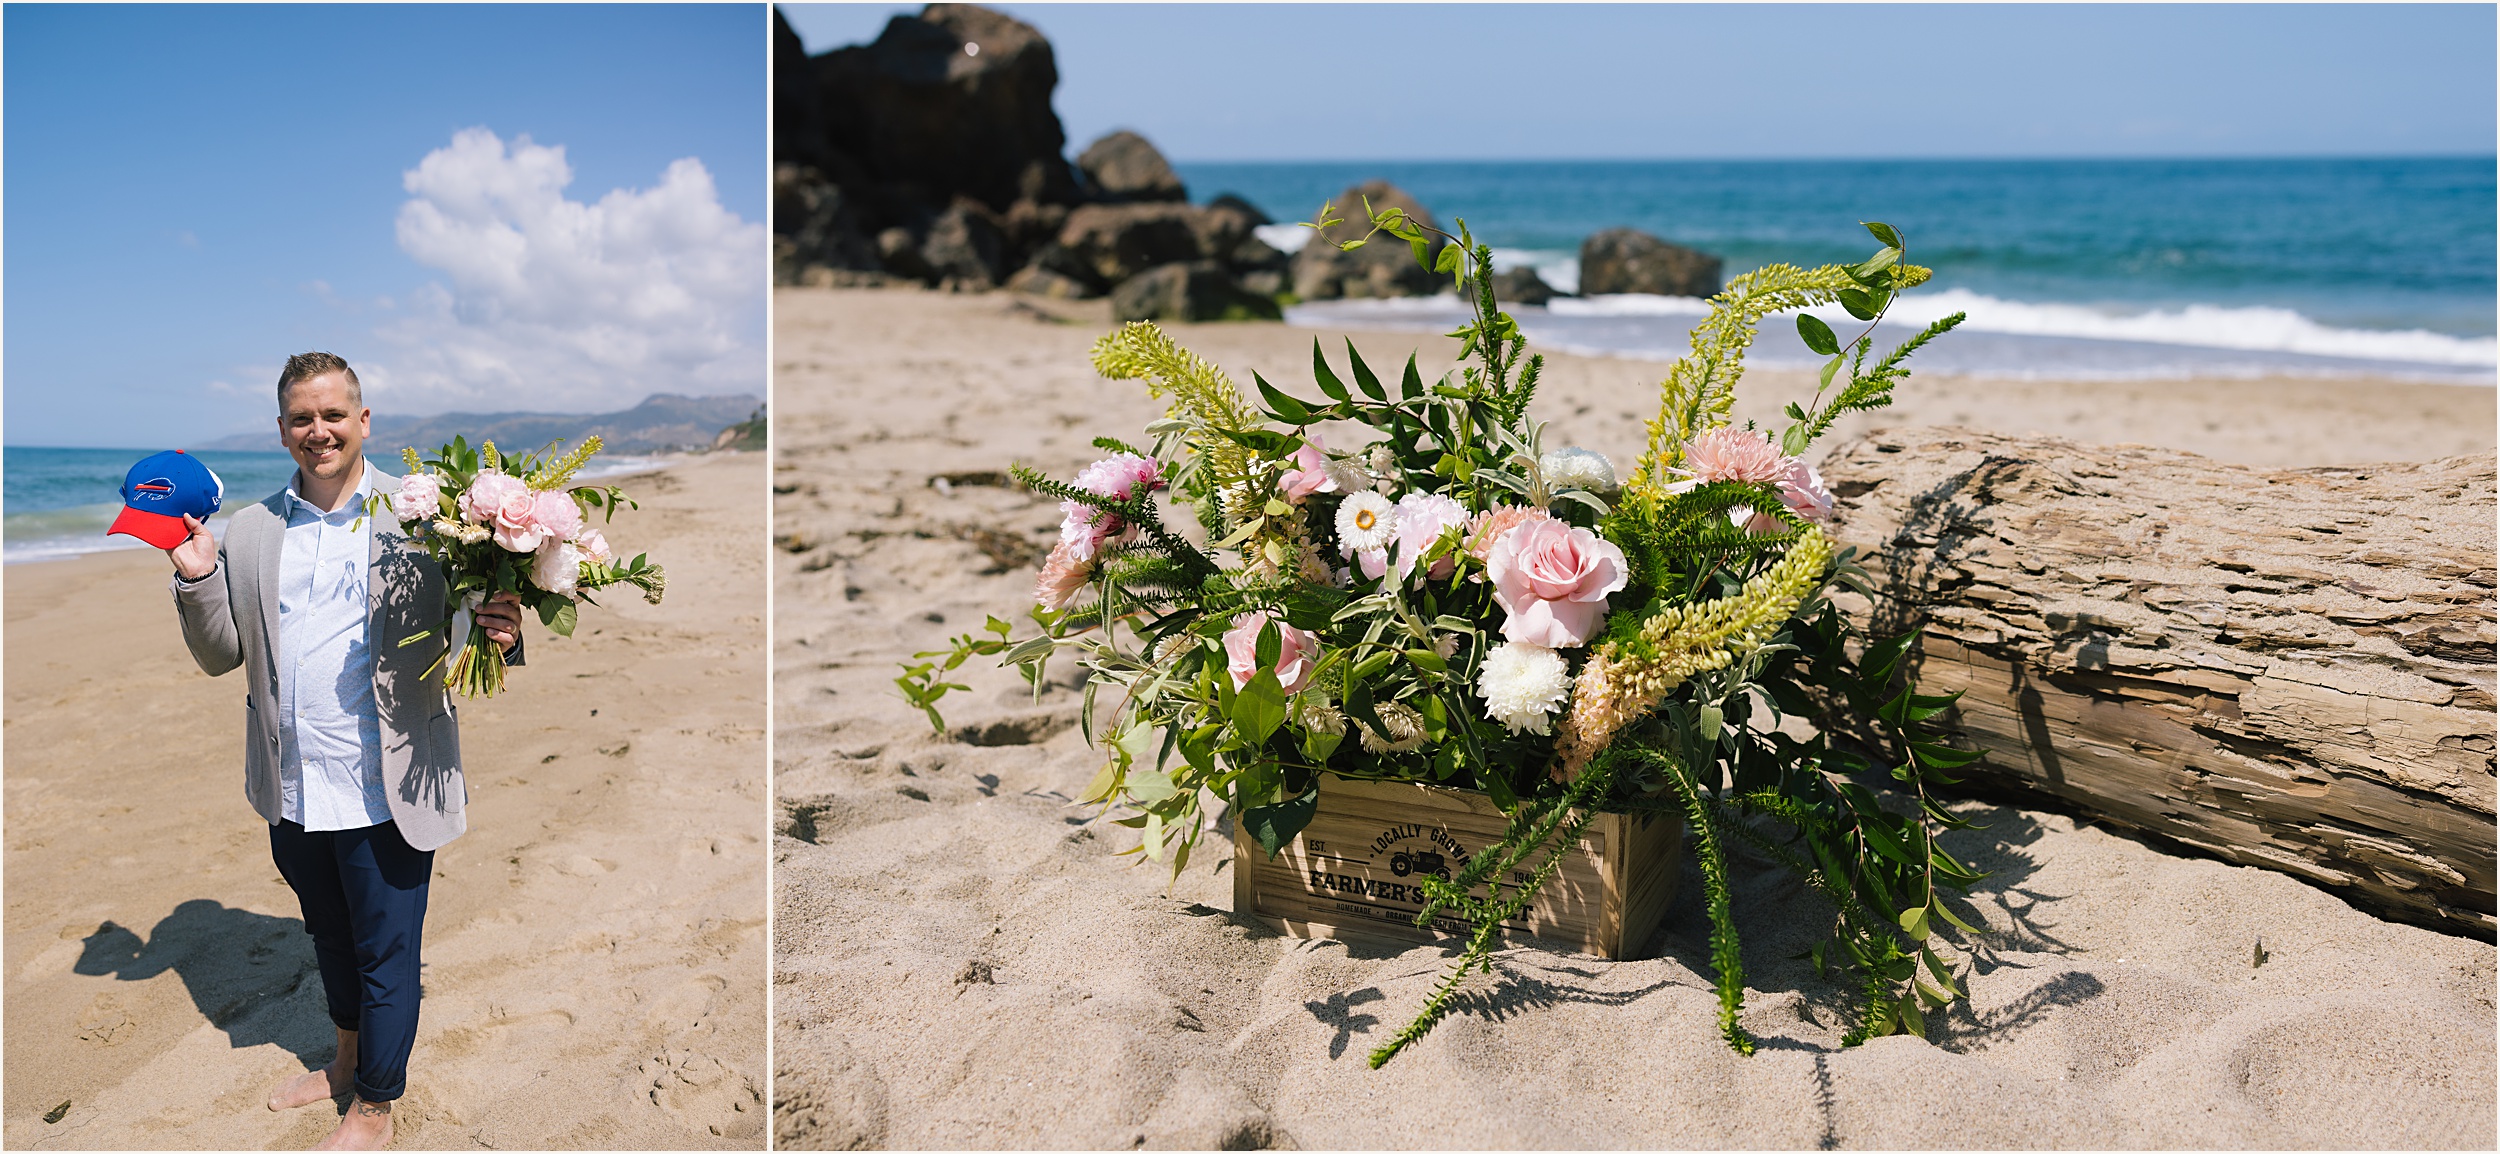 Kelly-and-Peter-27-1024x768 Point Dume Malibu Elopement Wedding // Kelly & Peter